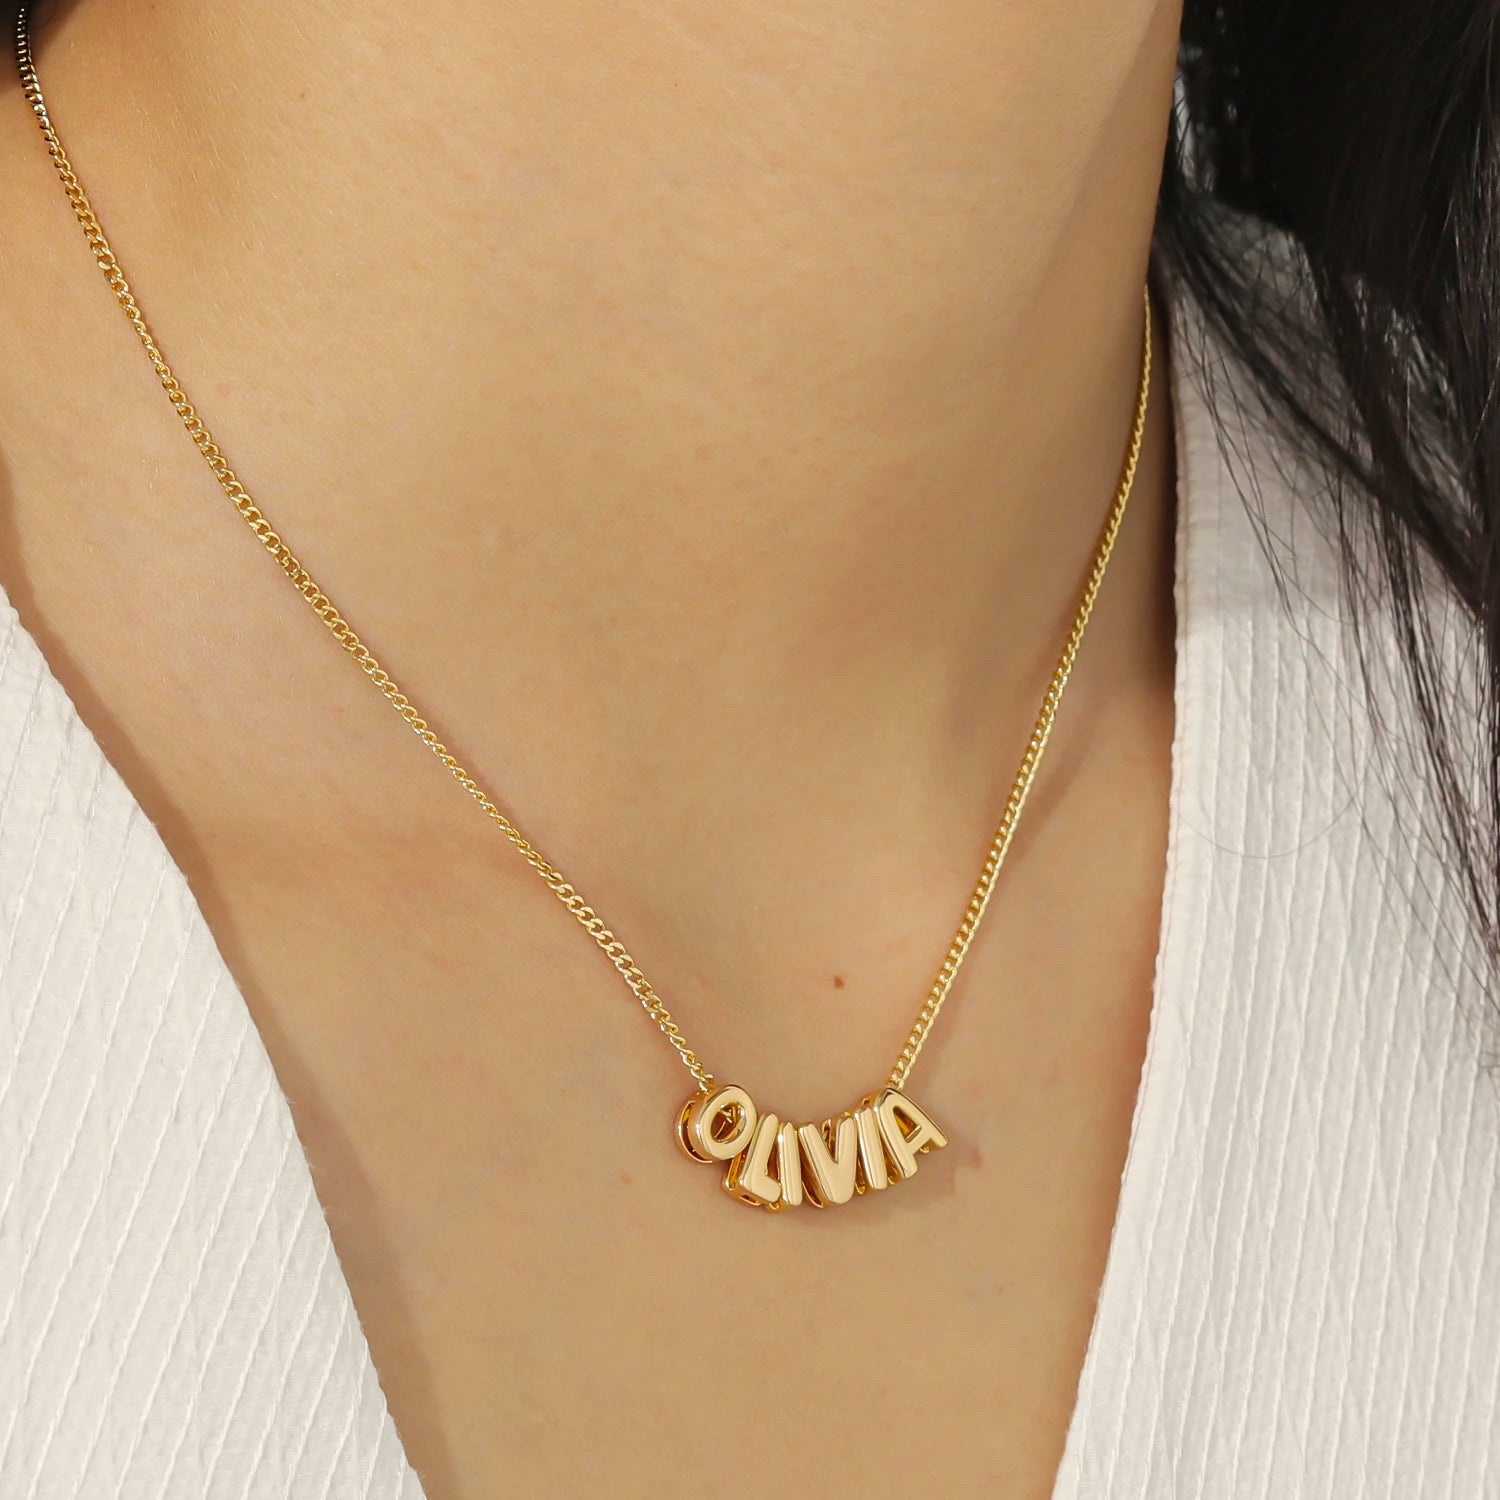 Personalised Bubble Letter Necklace